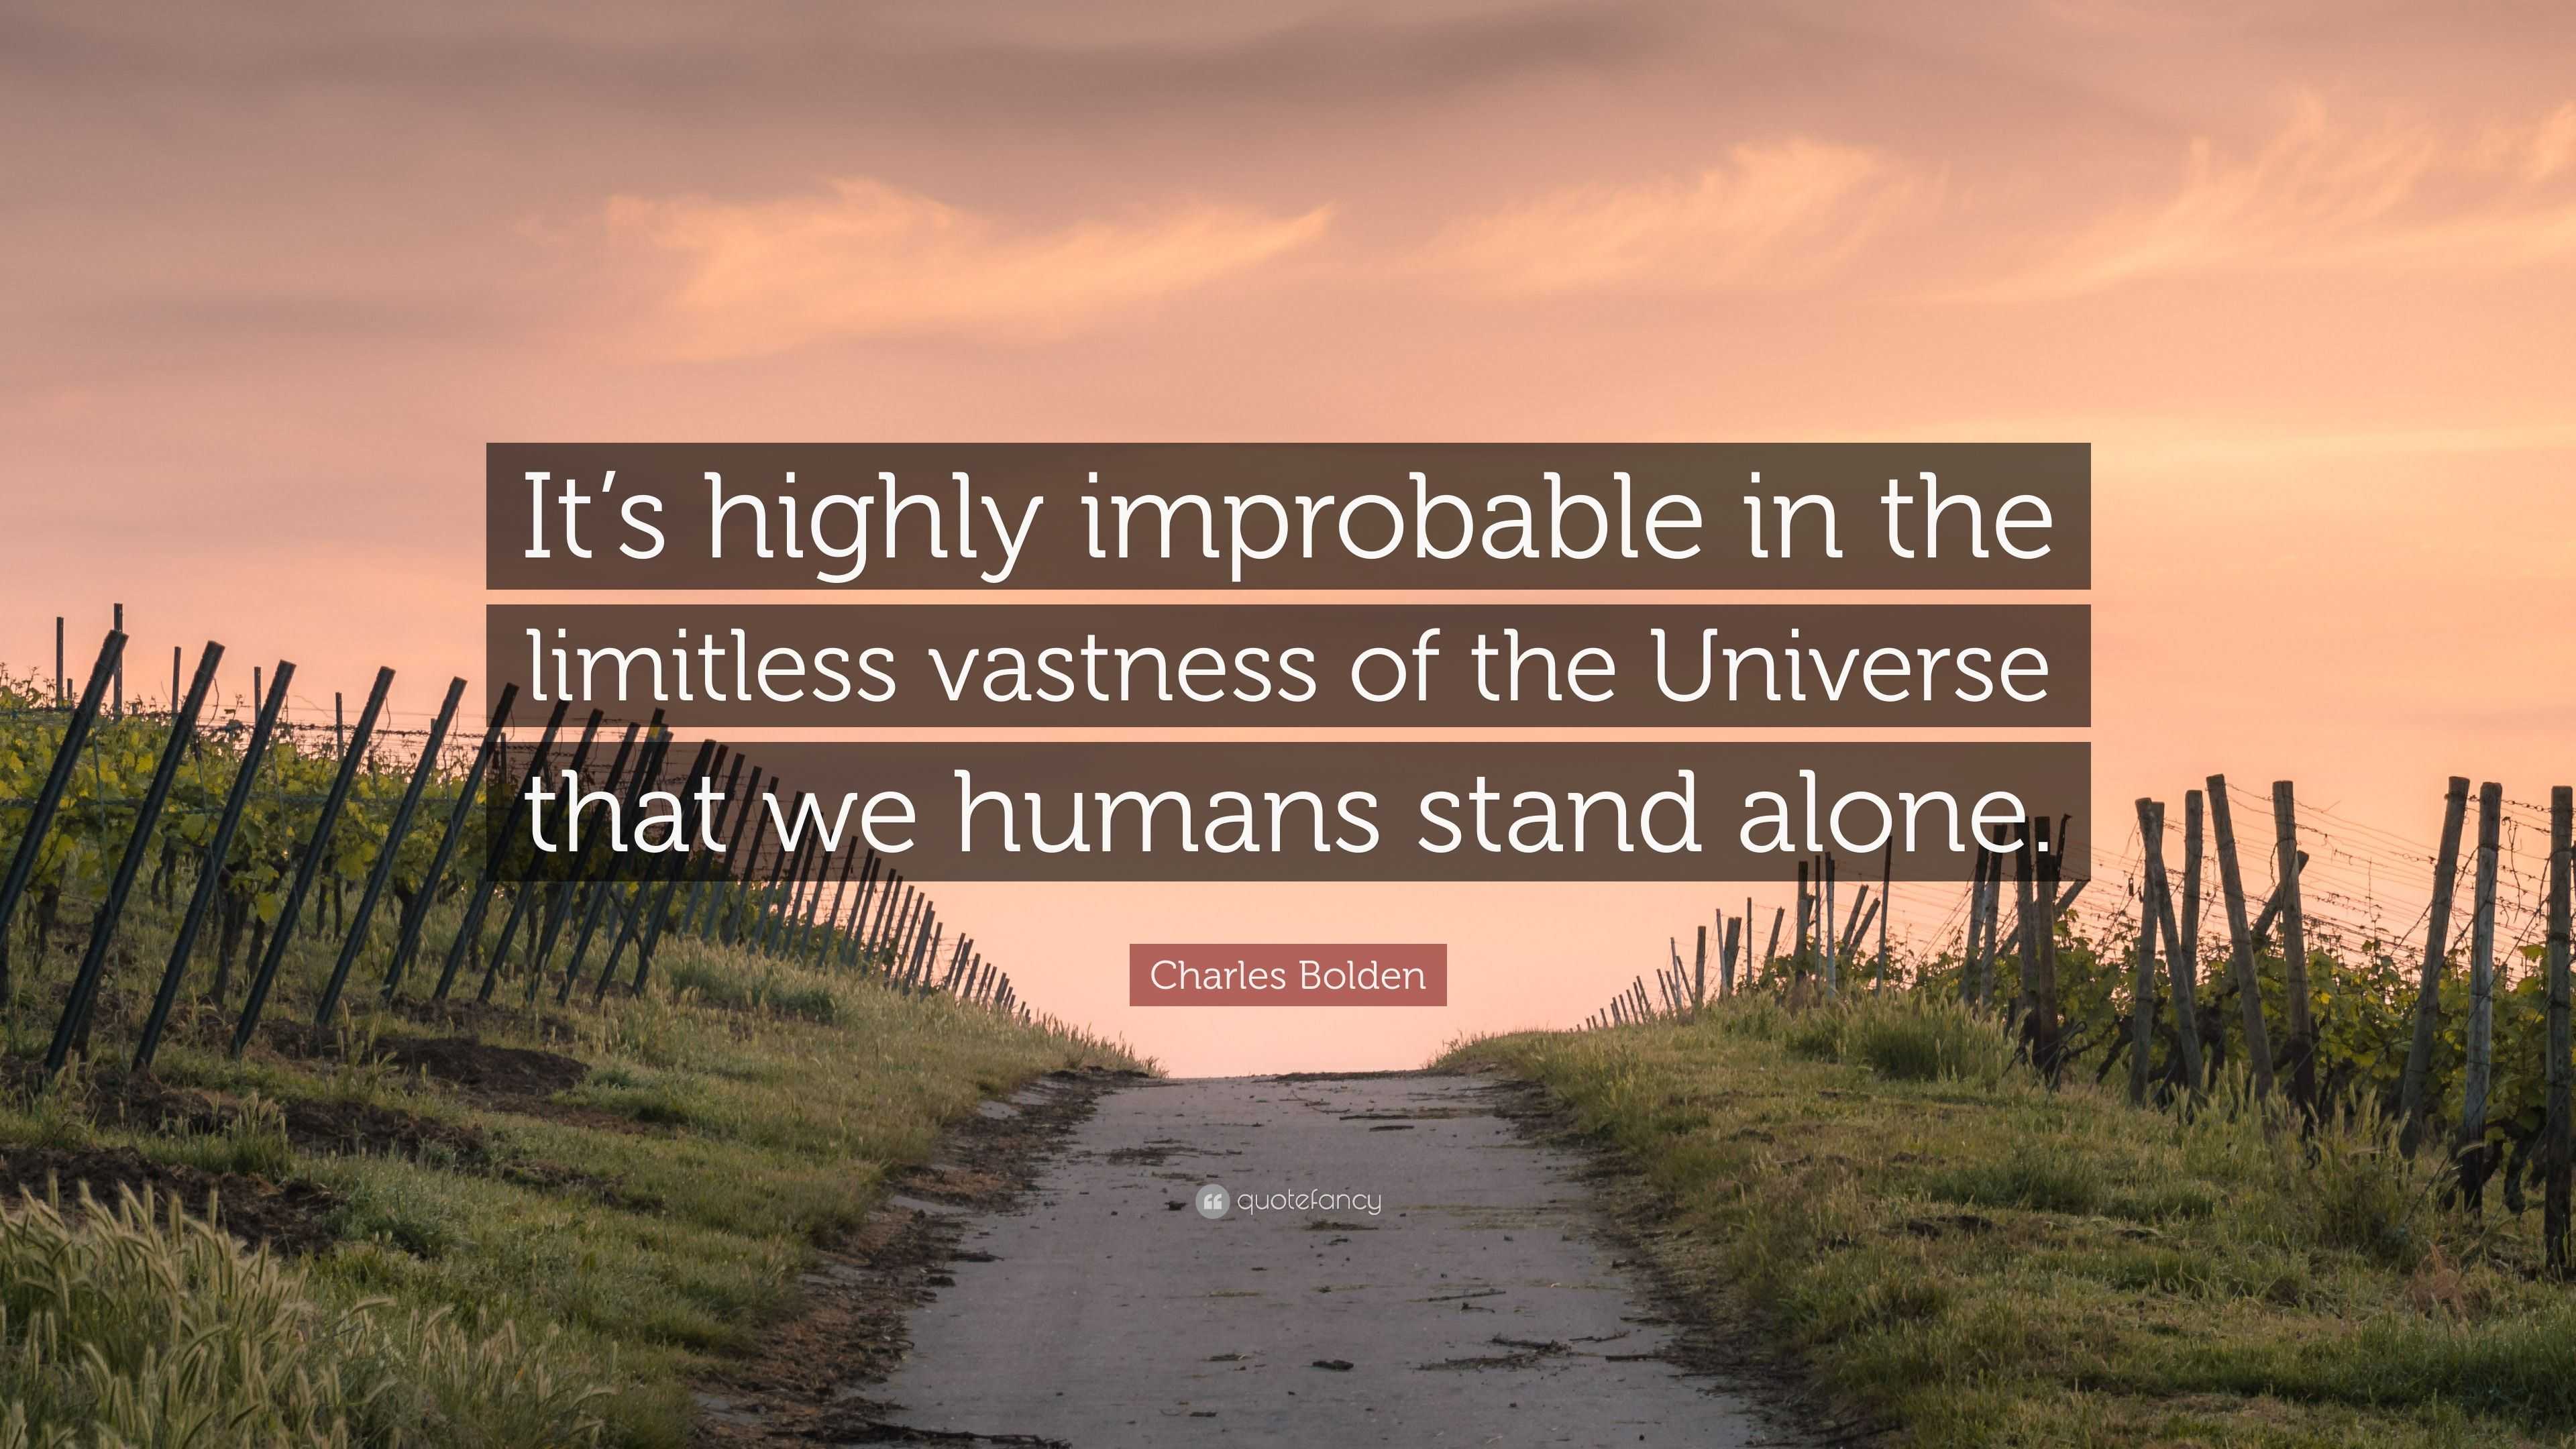 Charles Bolden Quote: “It's highly improbable in the limitless